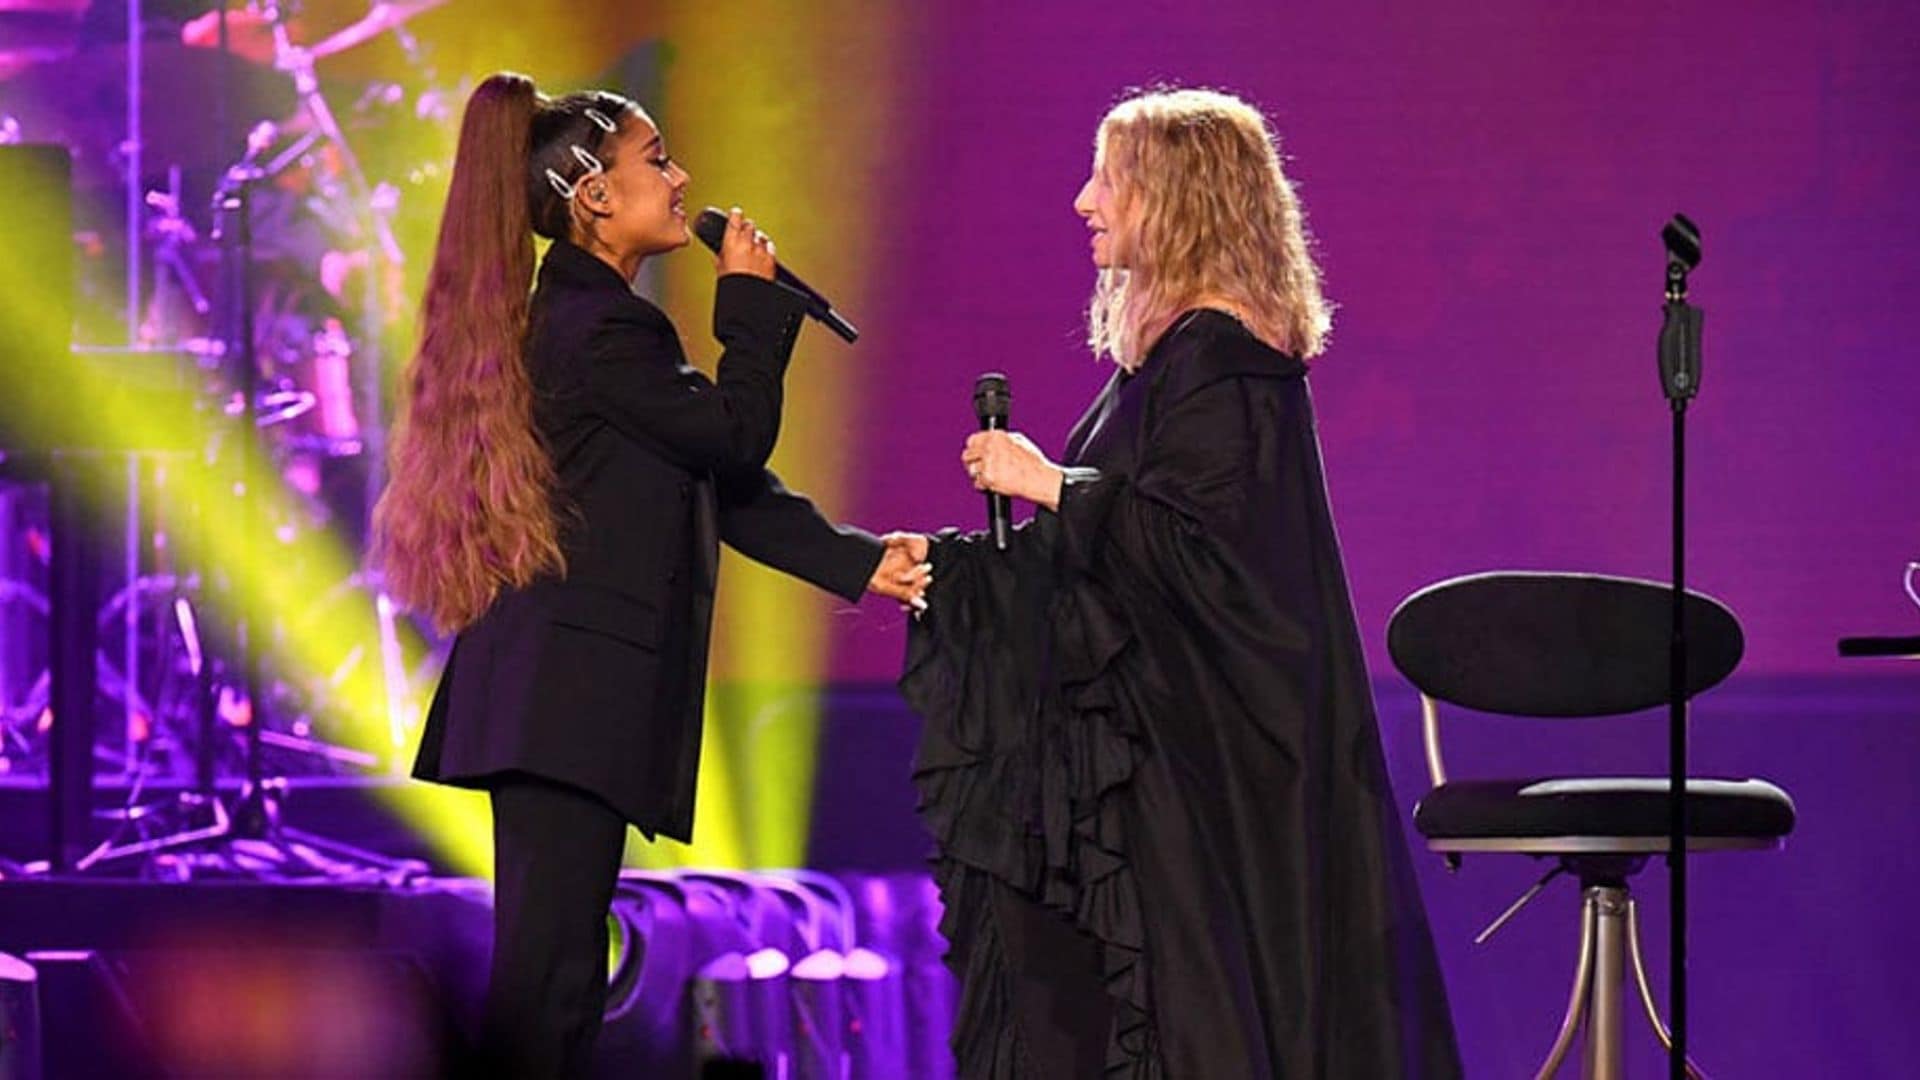 Ariana Grande takes the stage with Barbra Streisand and her reaction is priceless